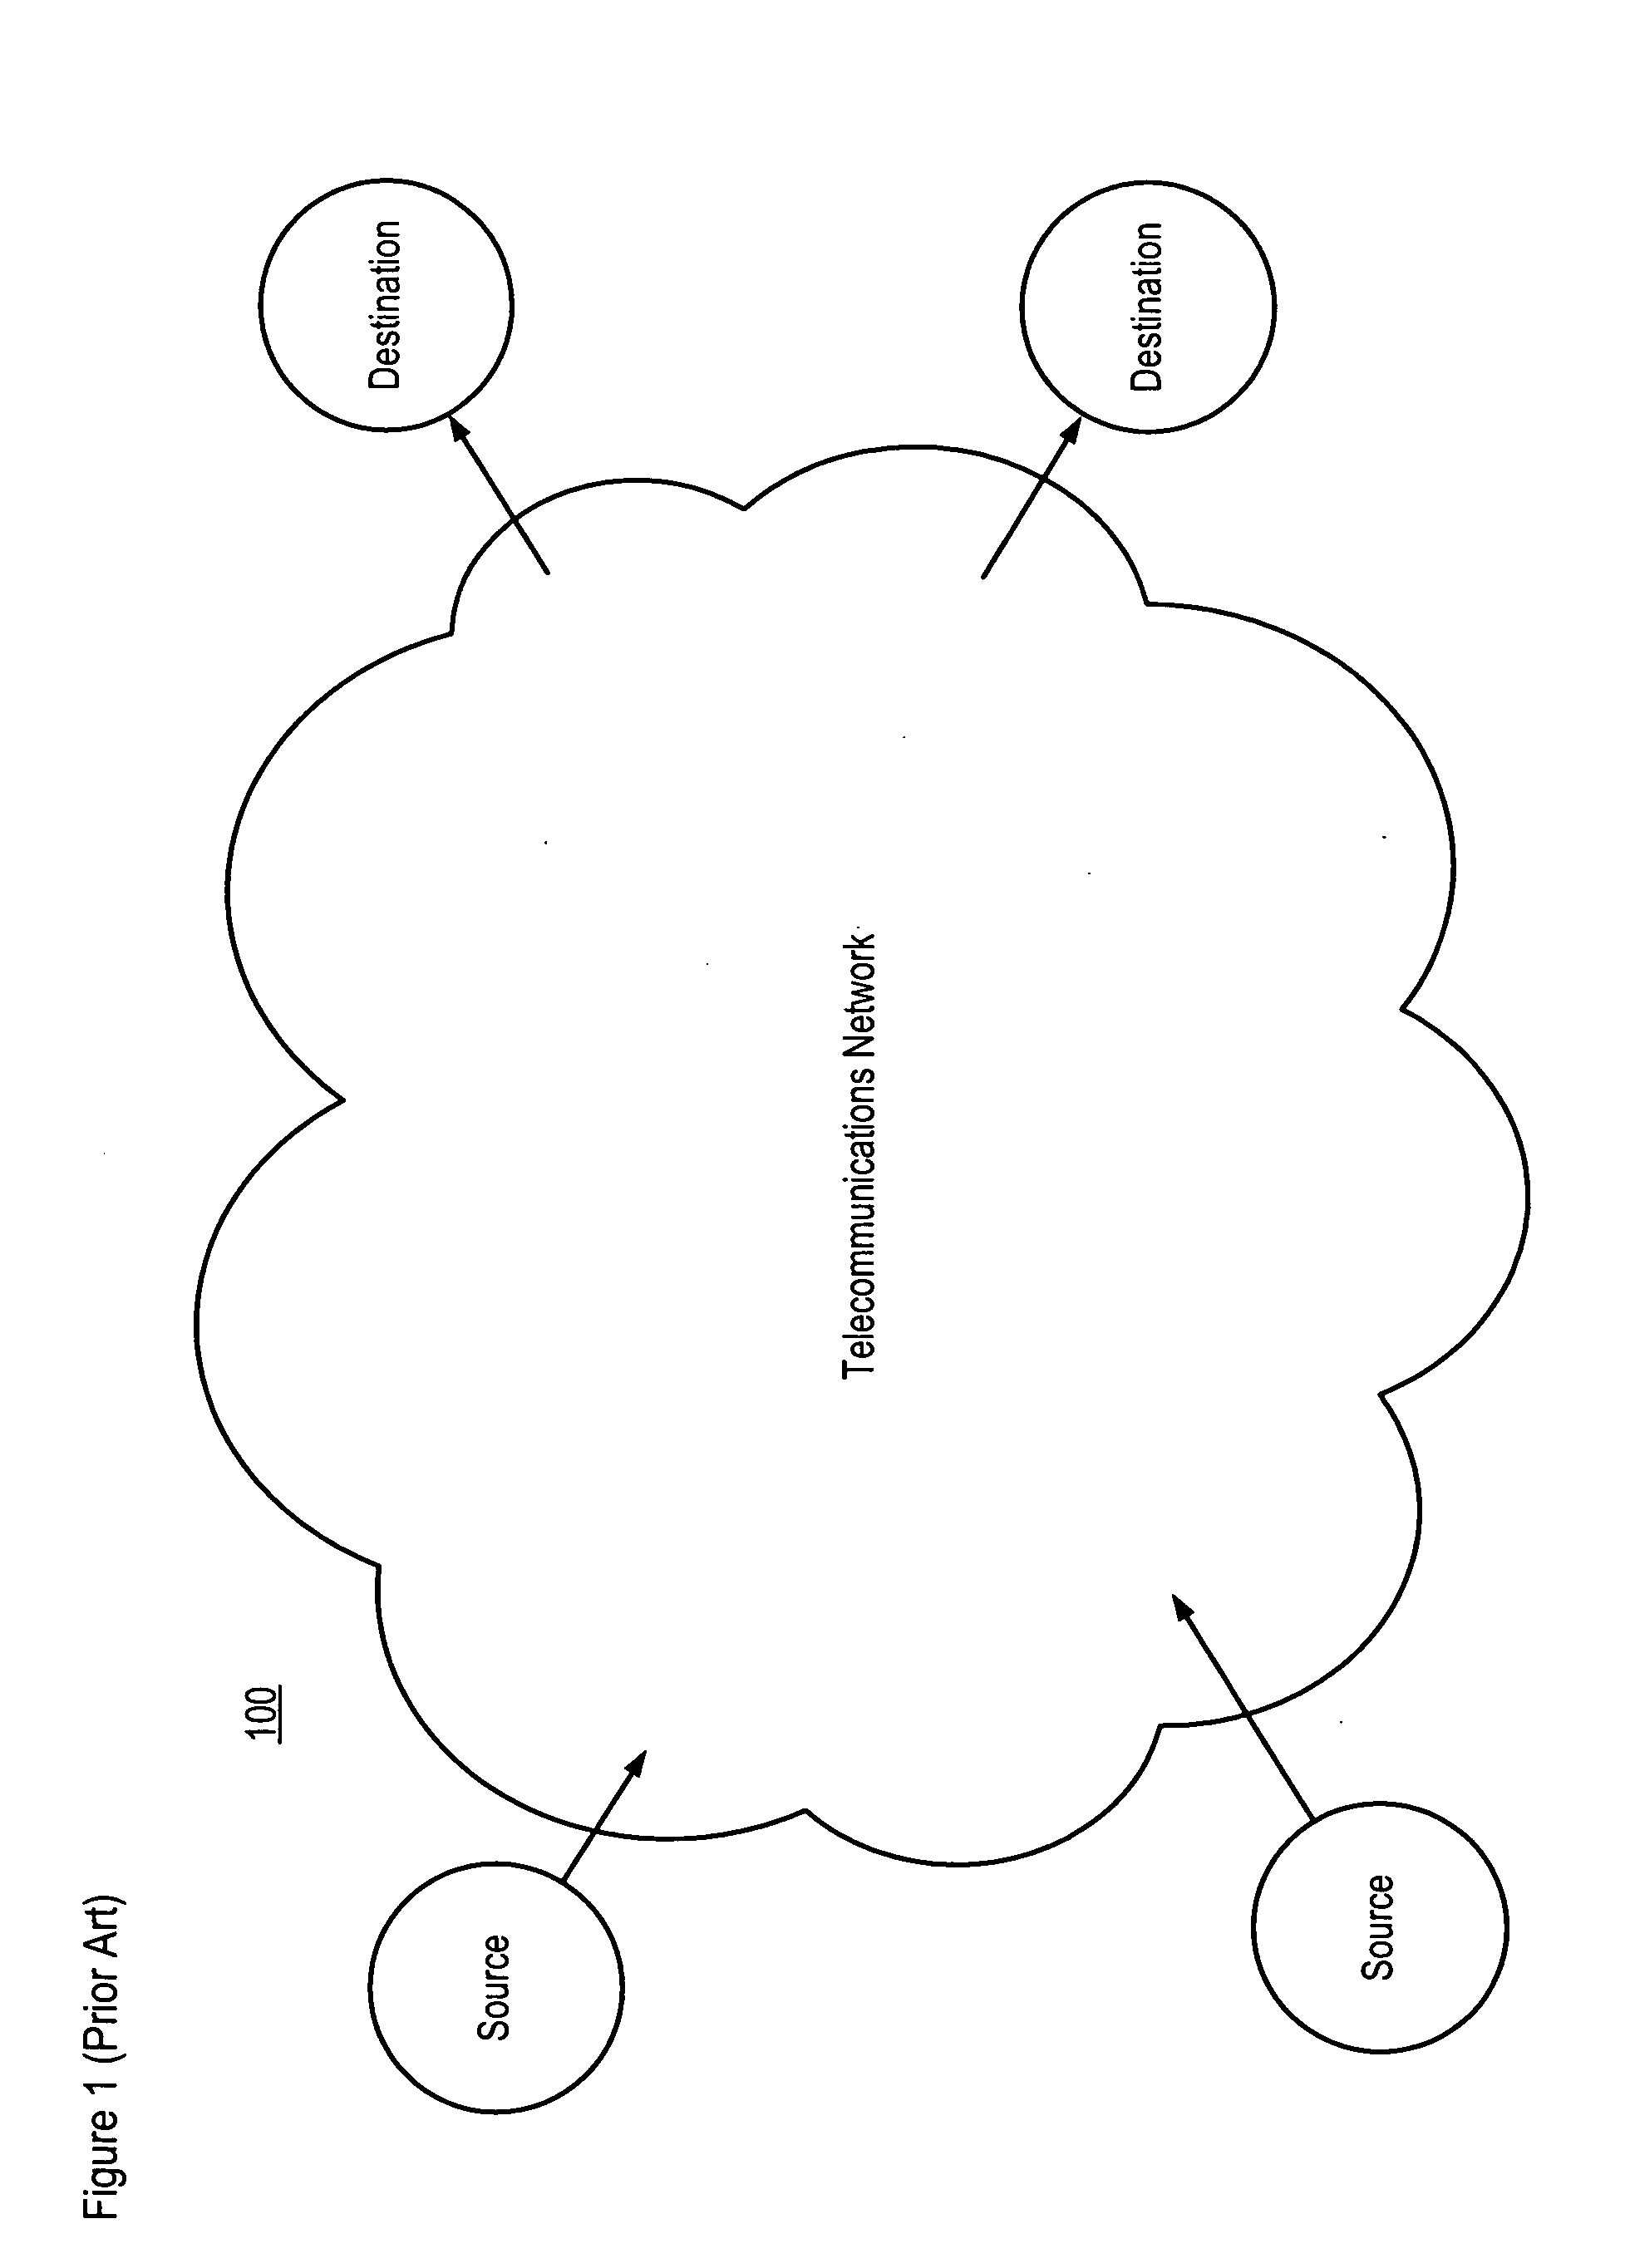 Coding and packet distribution for alternative network paths in telecommunications networks